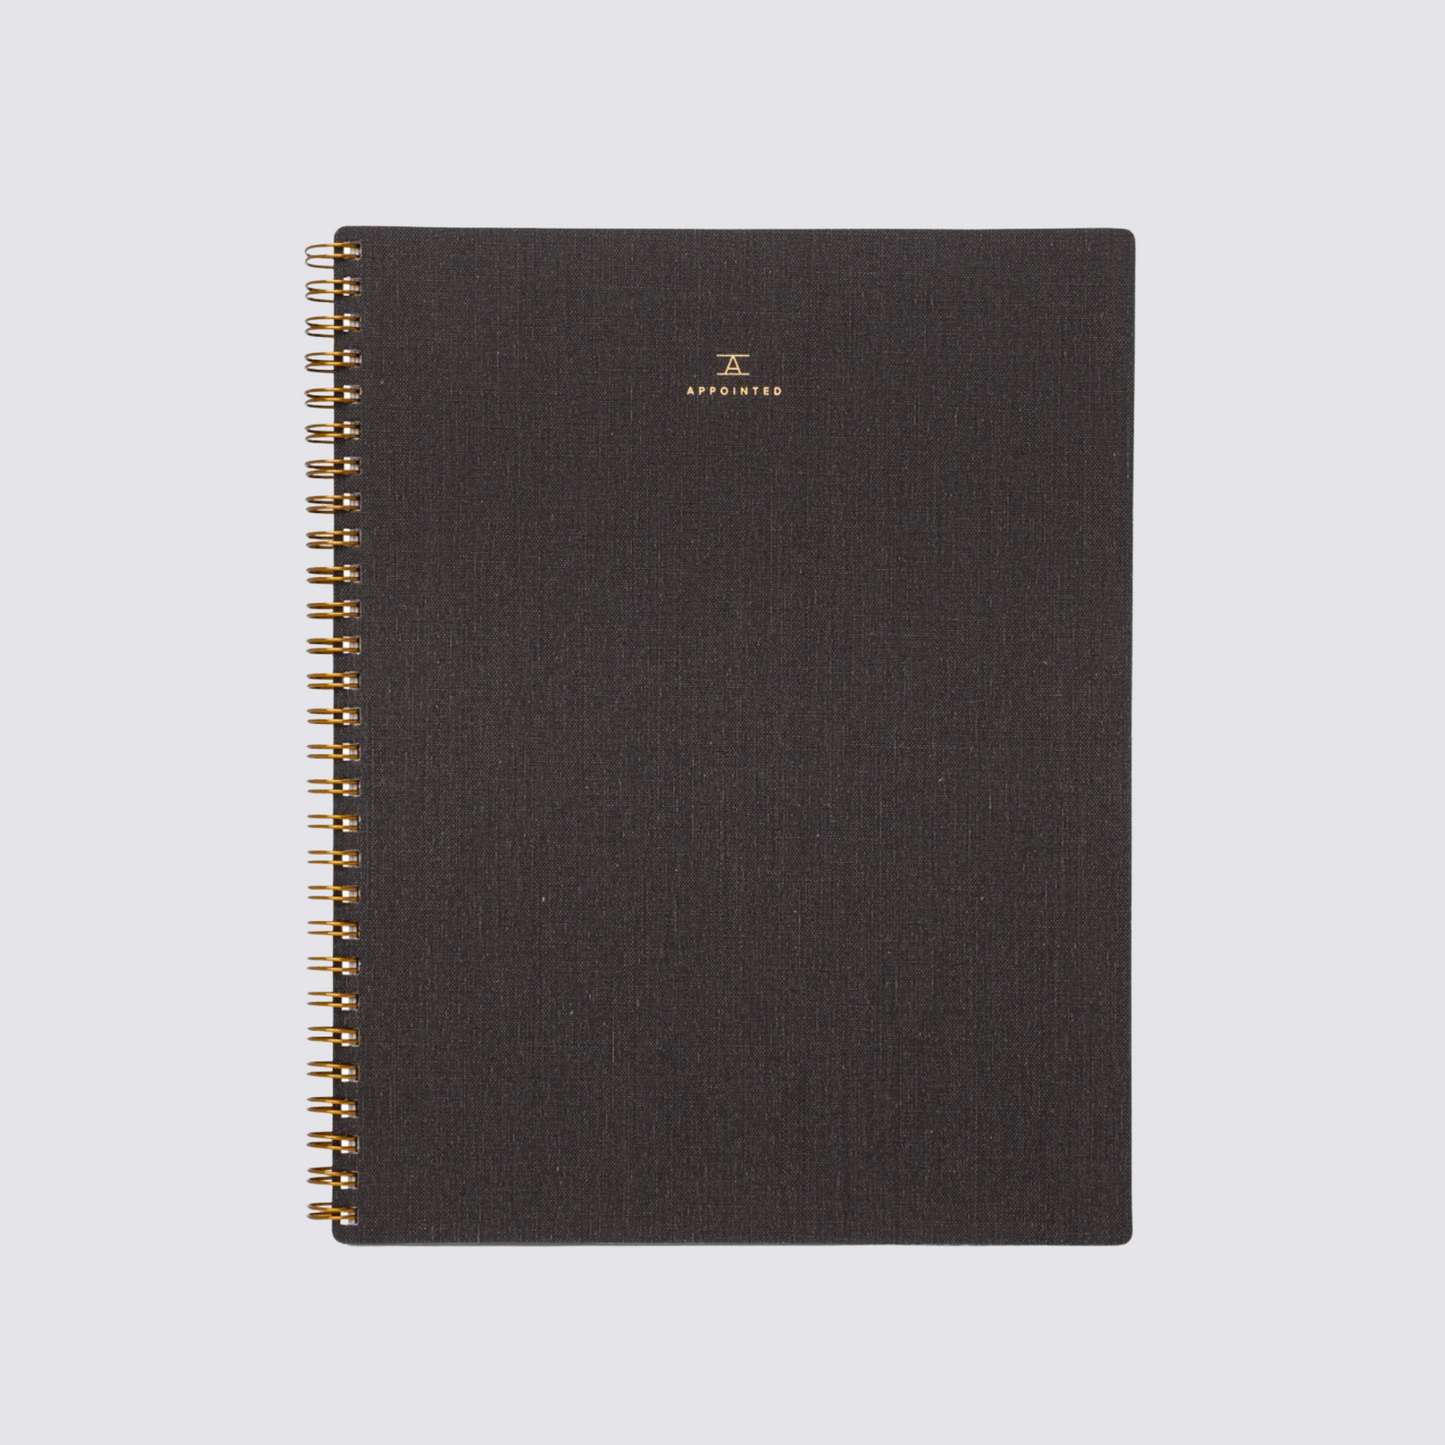 Appointed Notebook in Charcoal Grey